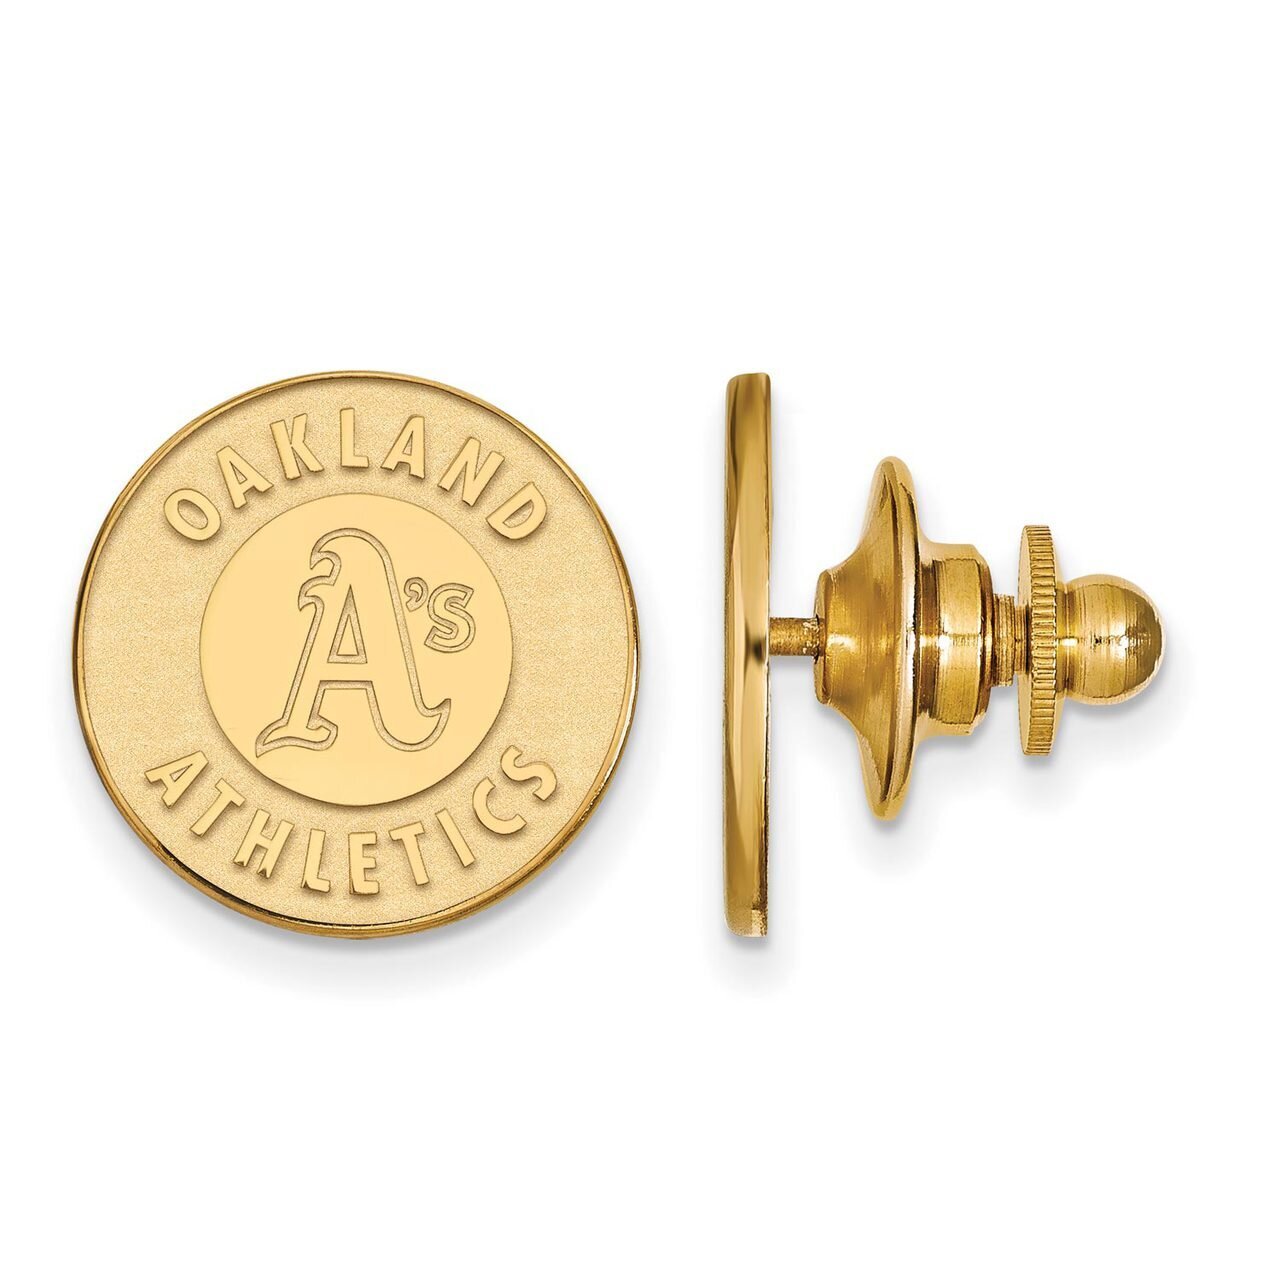 Oakland Athletics Lapel Pin Gold-plated Silver GP007ATH